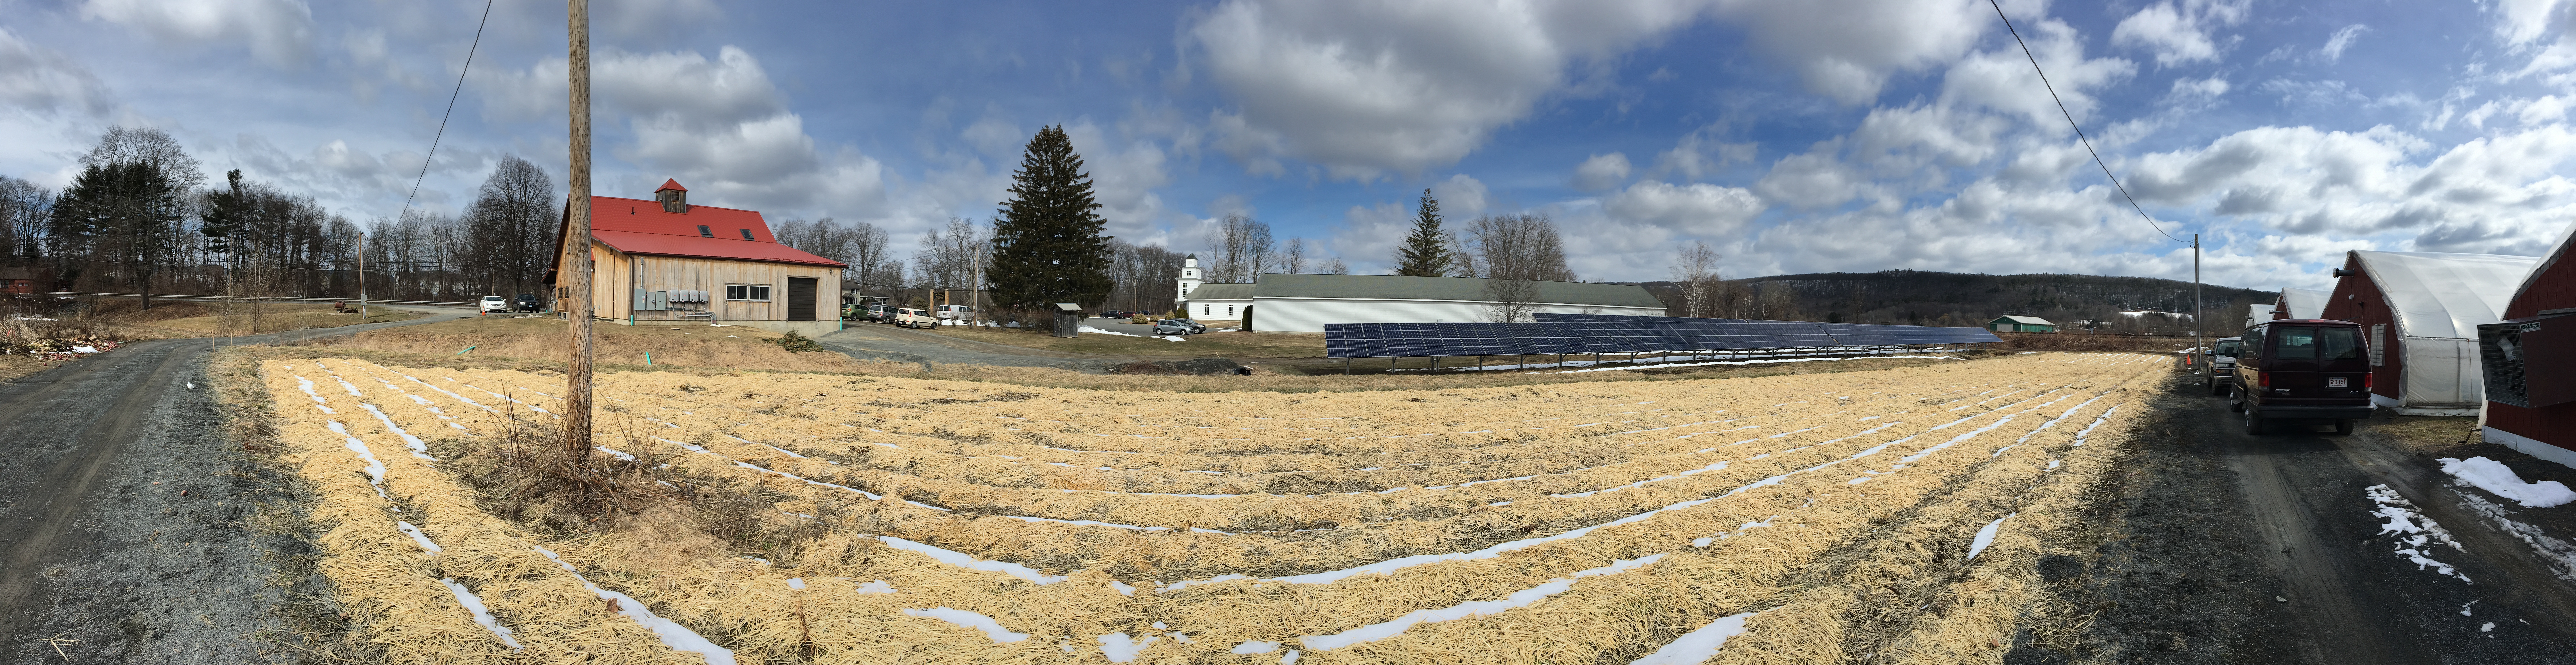 Solar array installed by PV Squared. For Atlas Farm Store in South Deerfield, MA